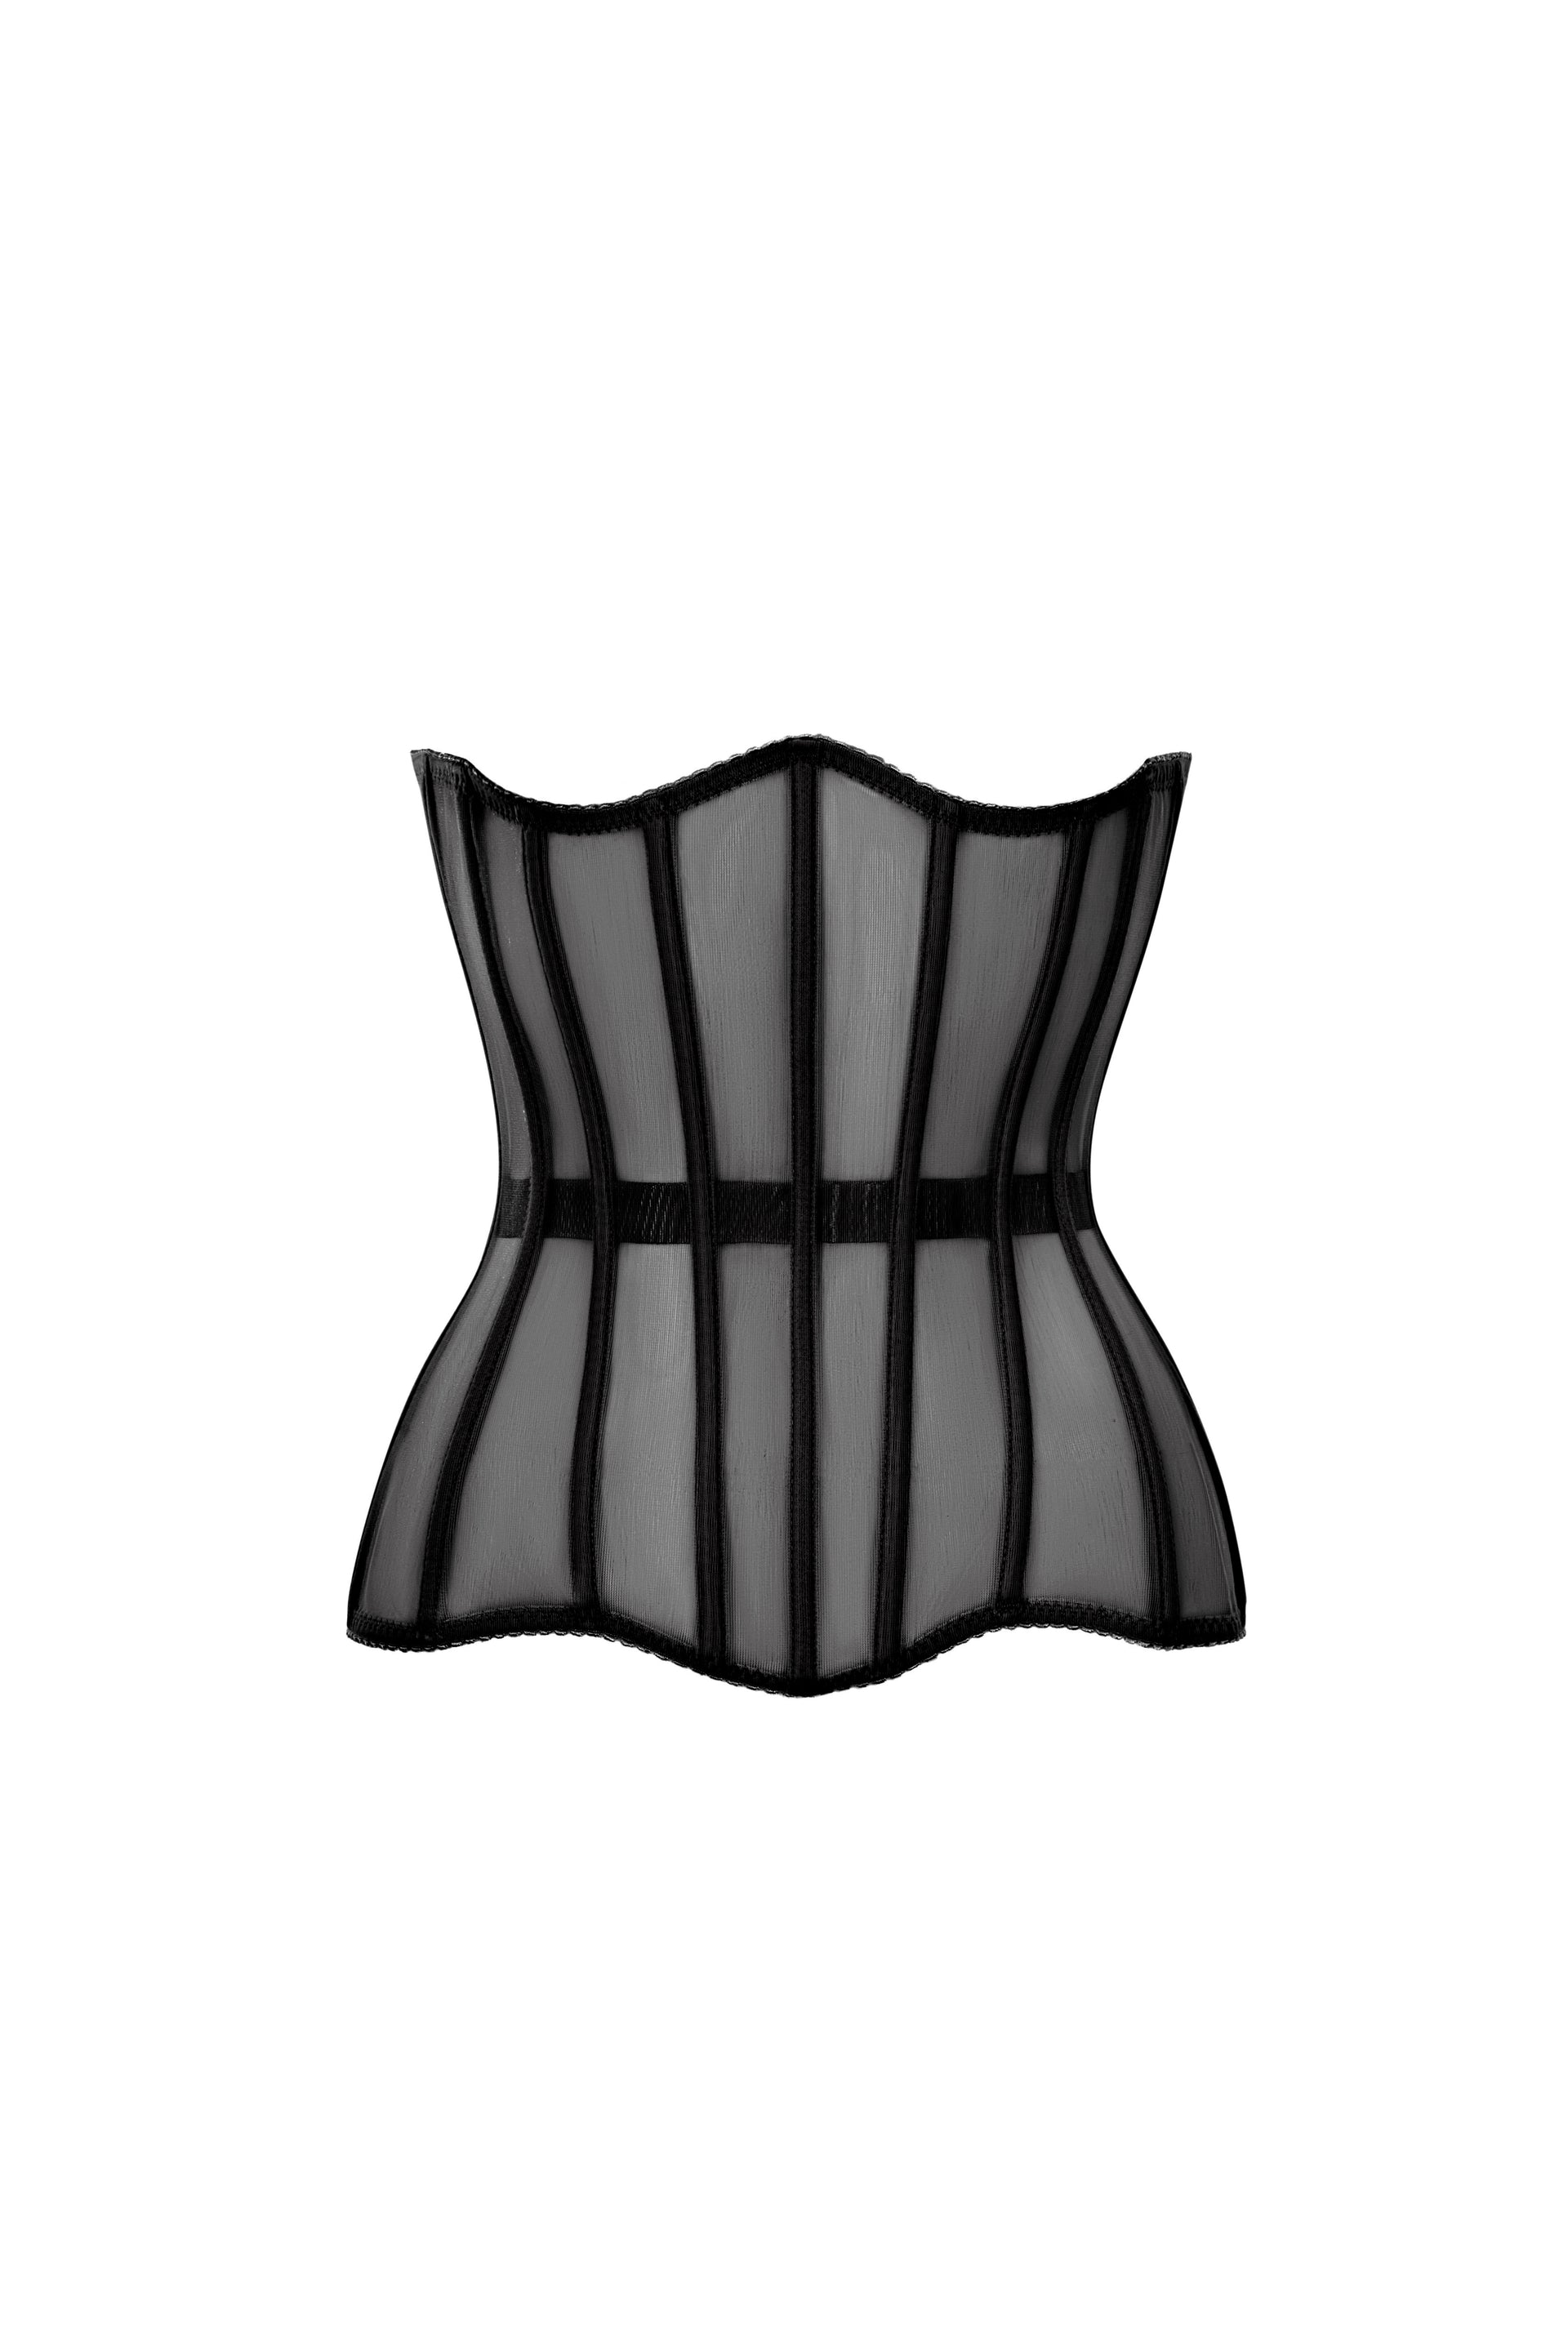 High Quality Latex Corset with Cups made in Austria